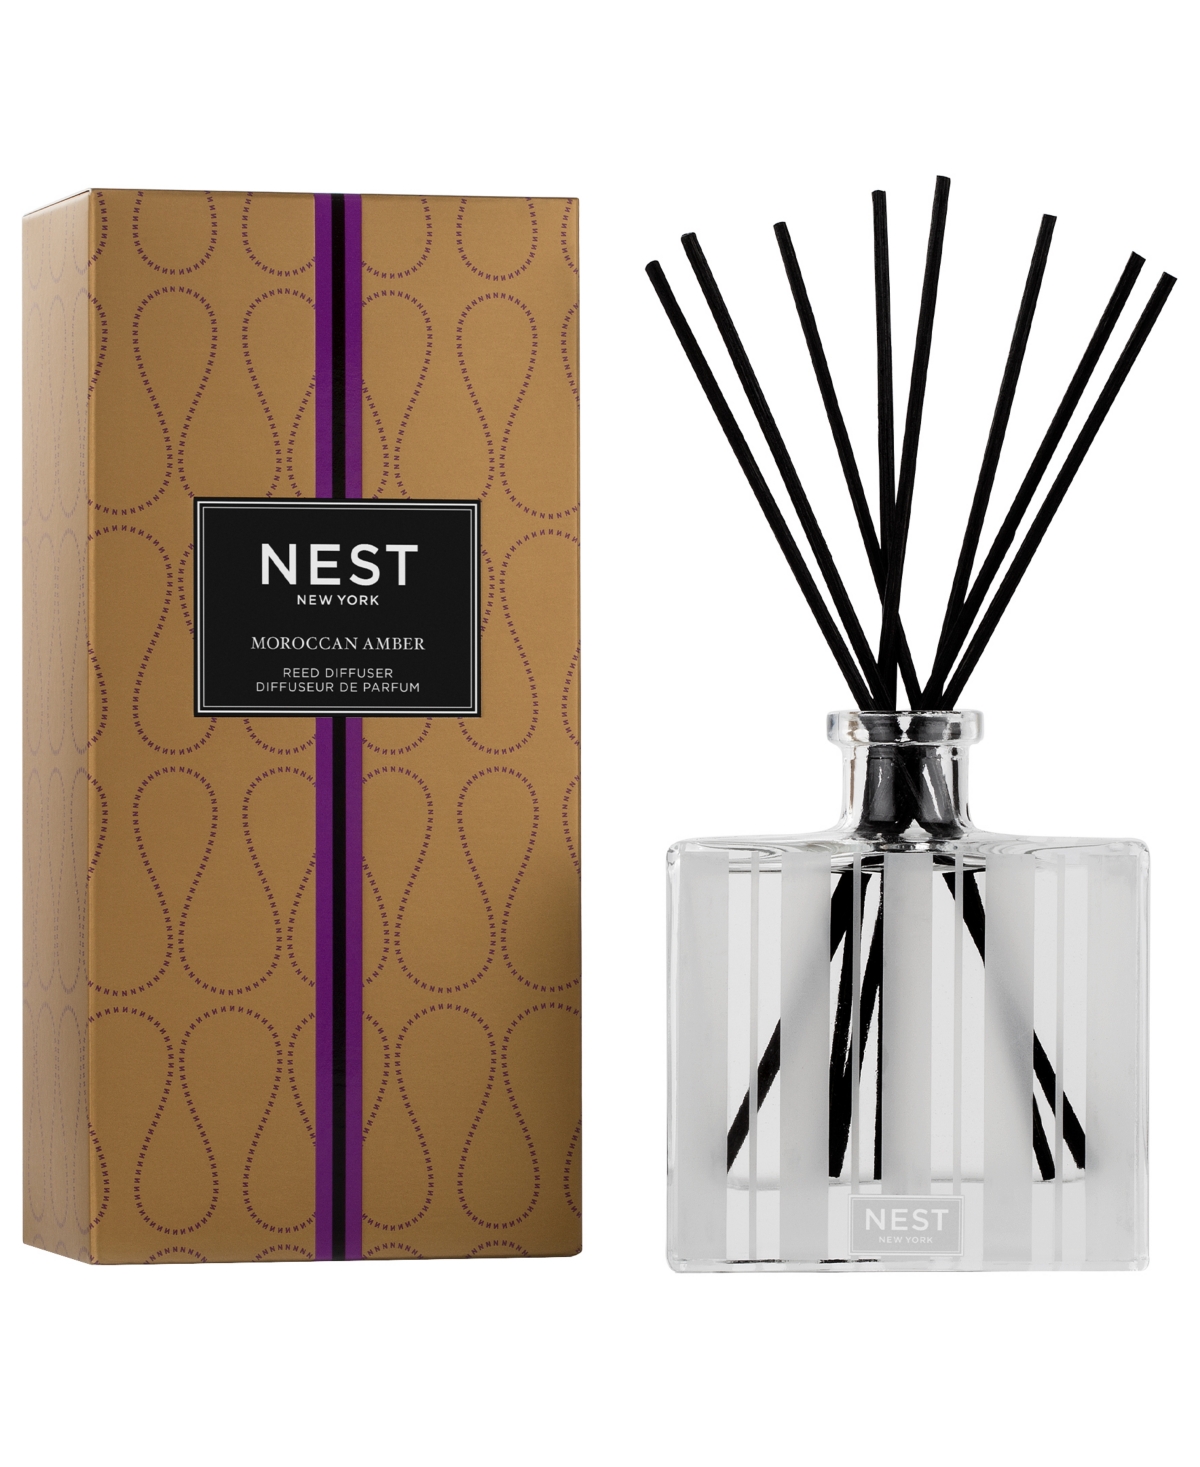 Moroccan Amber Reed Diffuser, 5.9 oz.